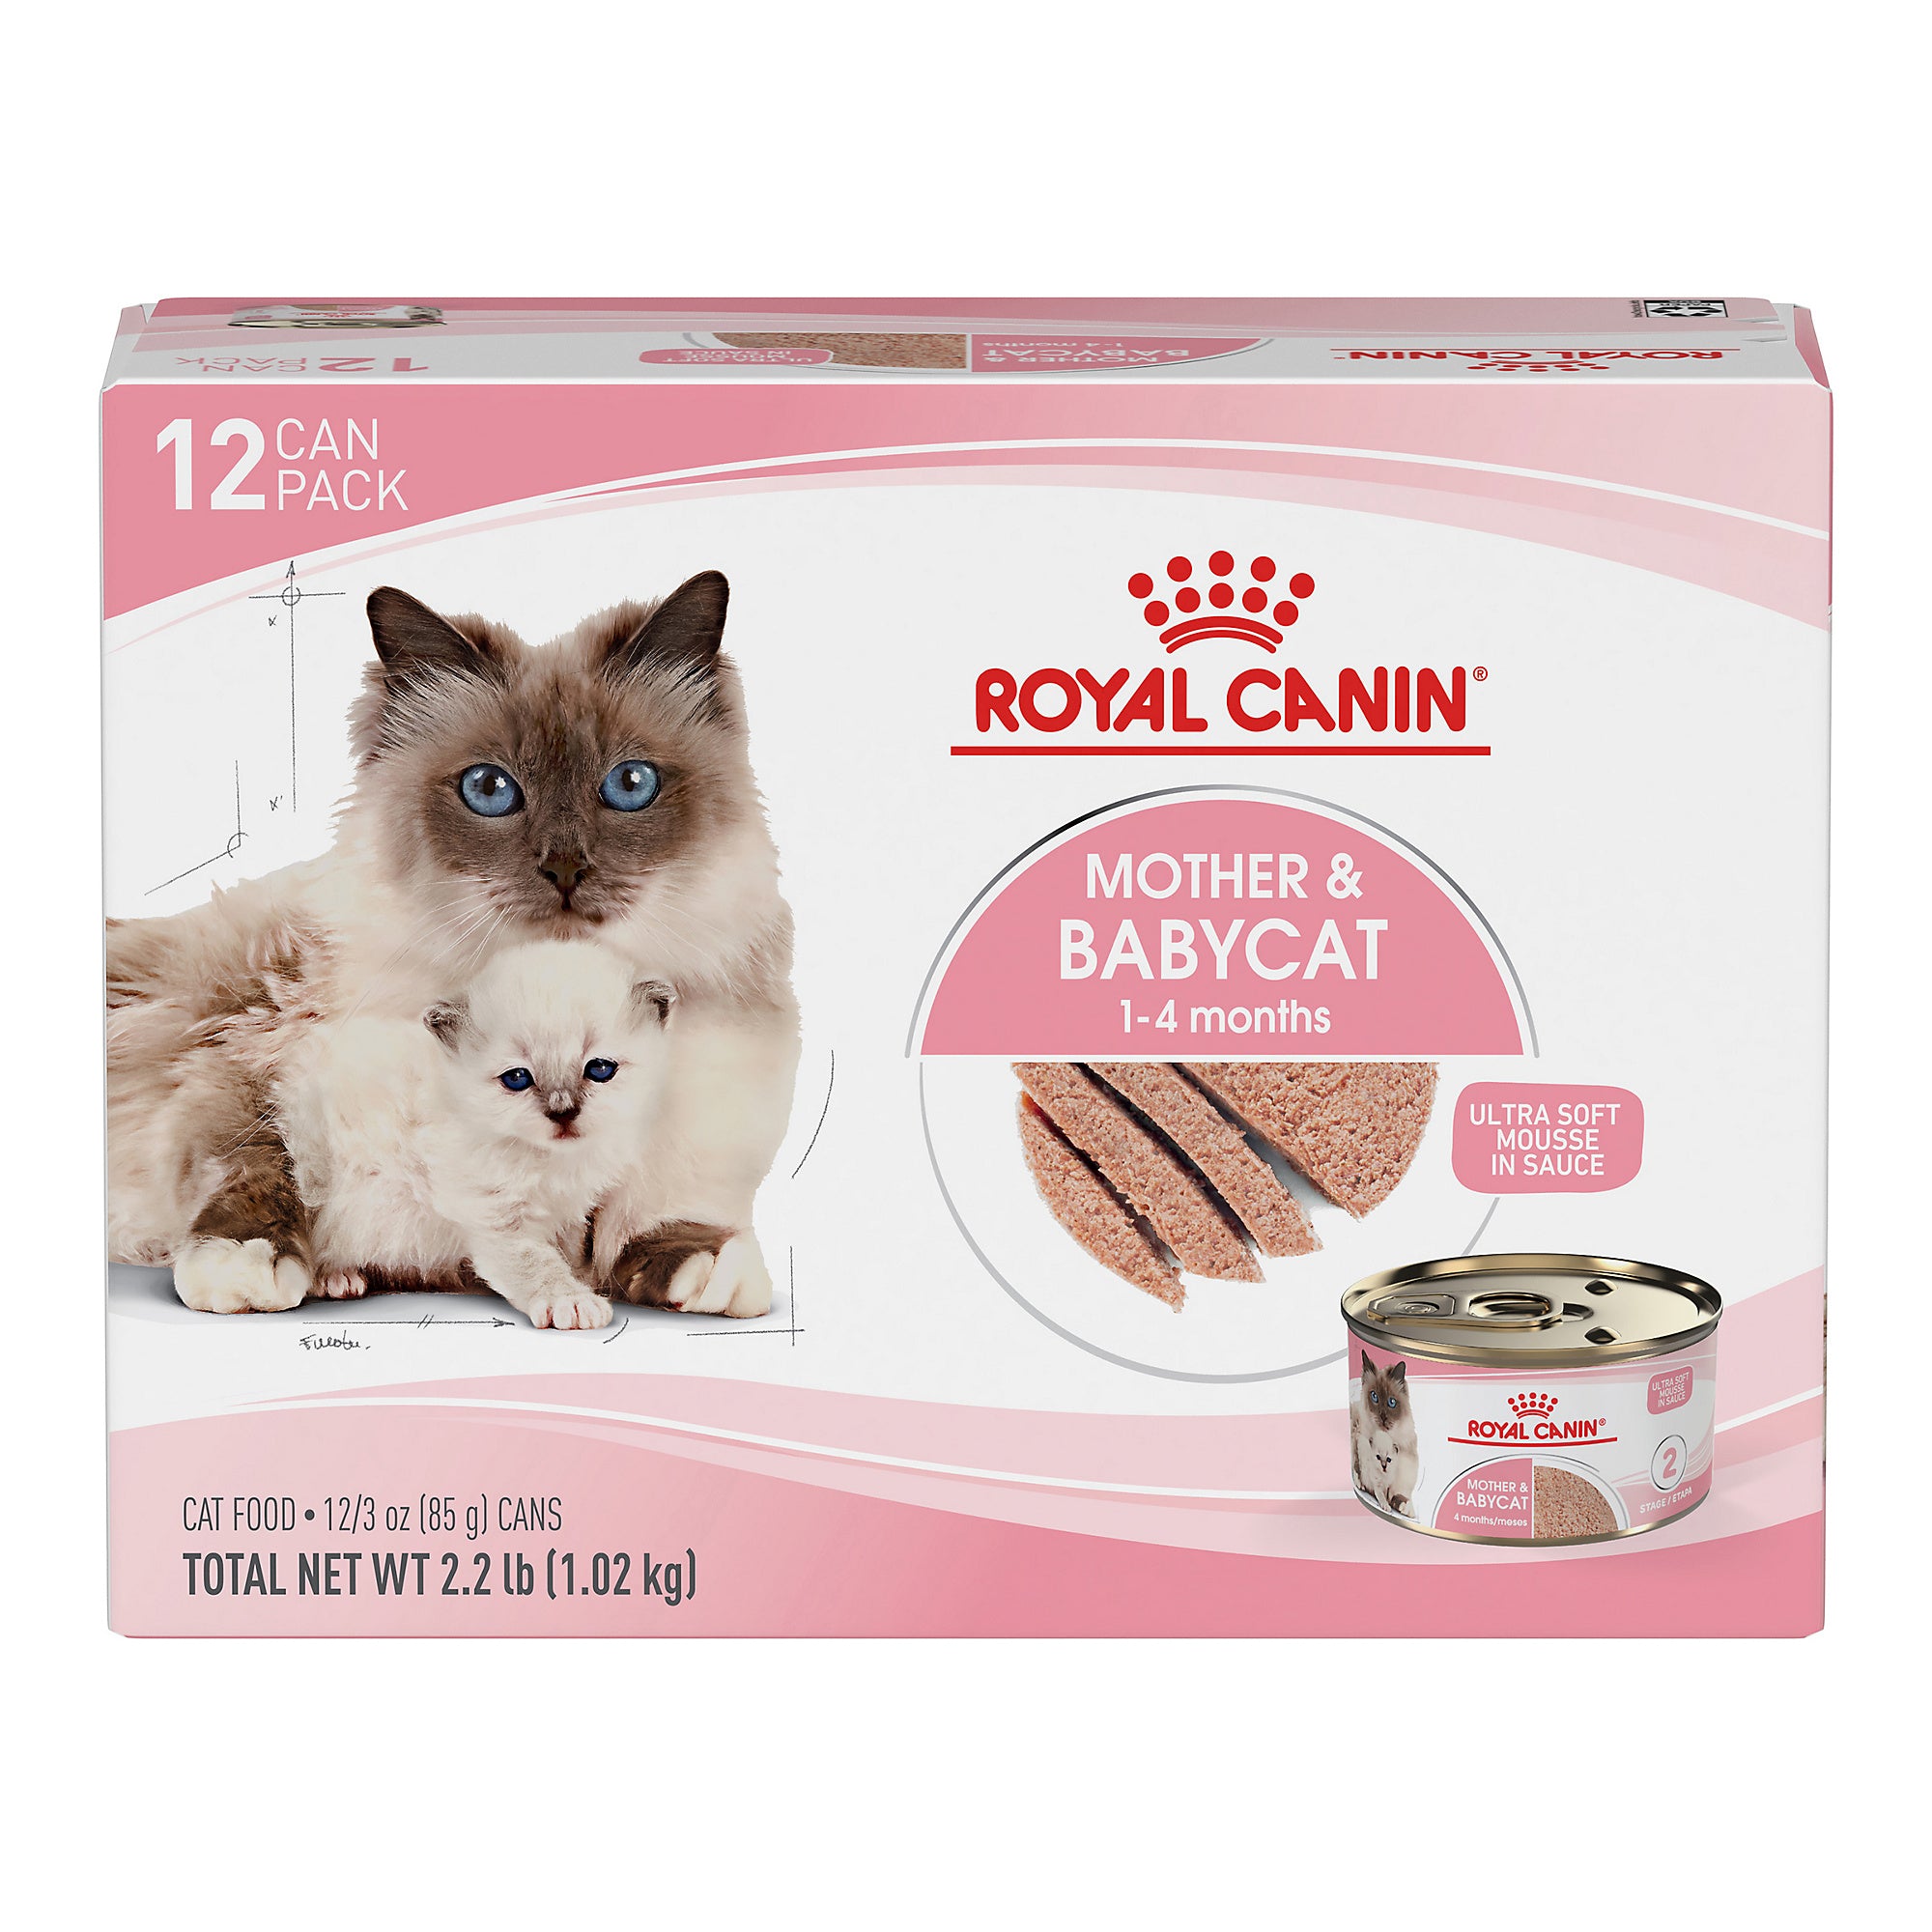 Royal Canin® Feline Health Nutrition™ Mother & Babycat Ultra Soft Mousse in Sauce Canned Cat Food, 3 oz, 12-Pack